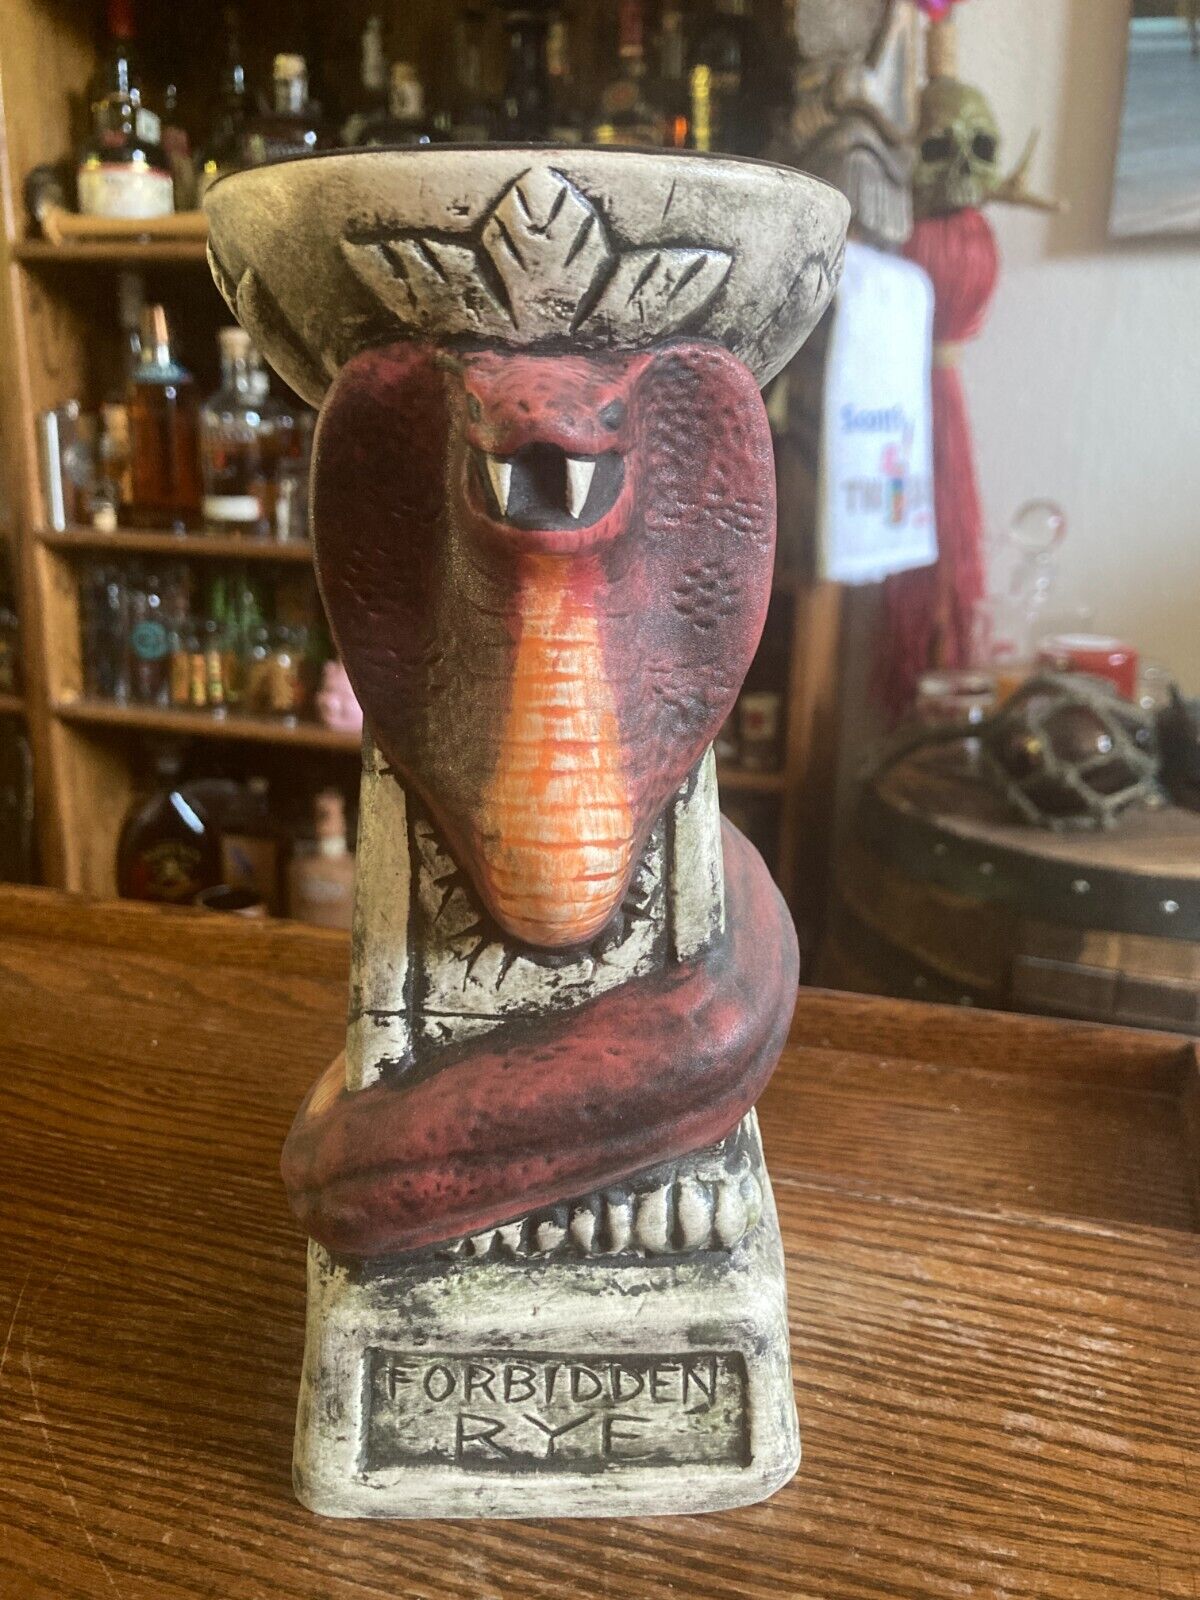 Tiki Mug, Forbidden Rye 2nd edition by Lost Temple Traders, Sold Out